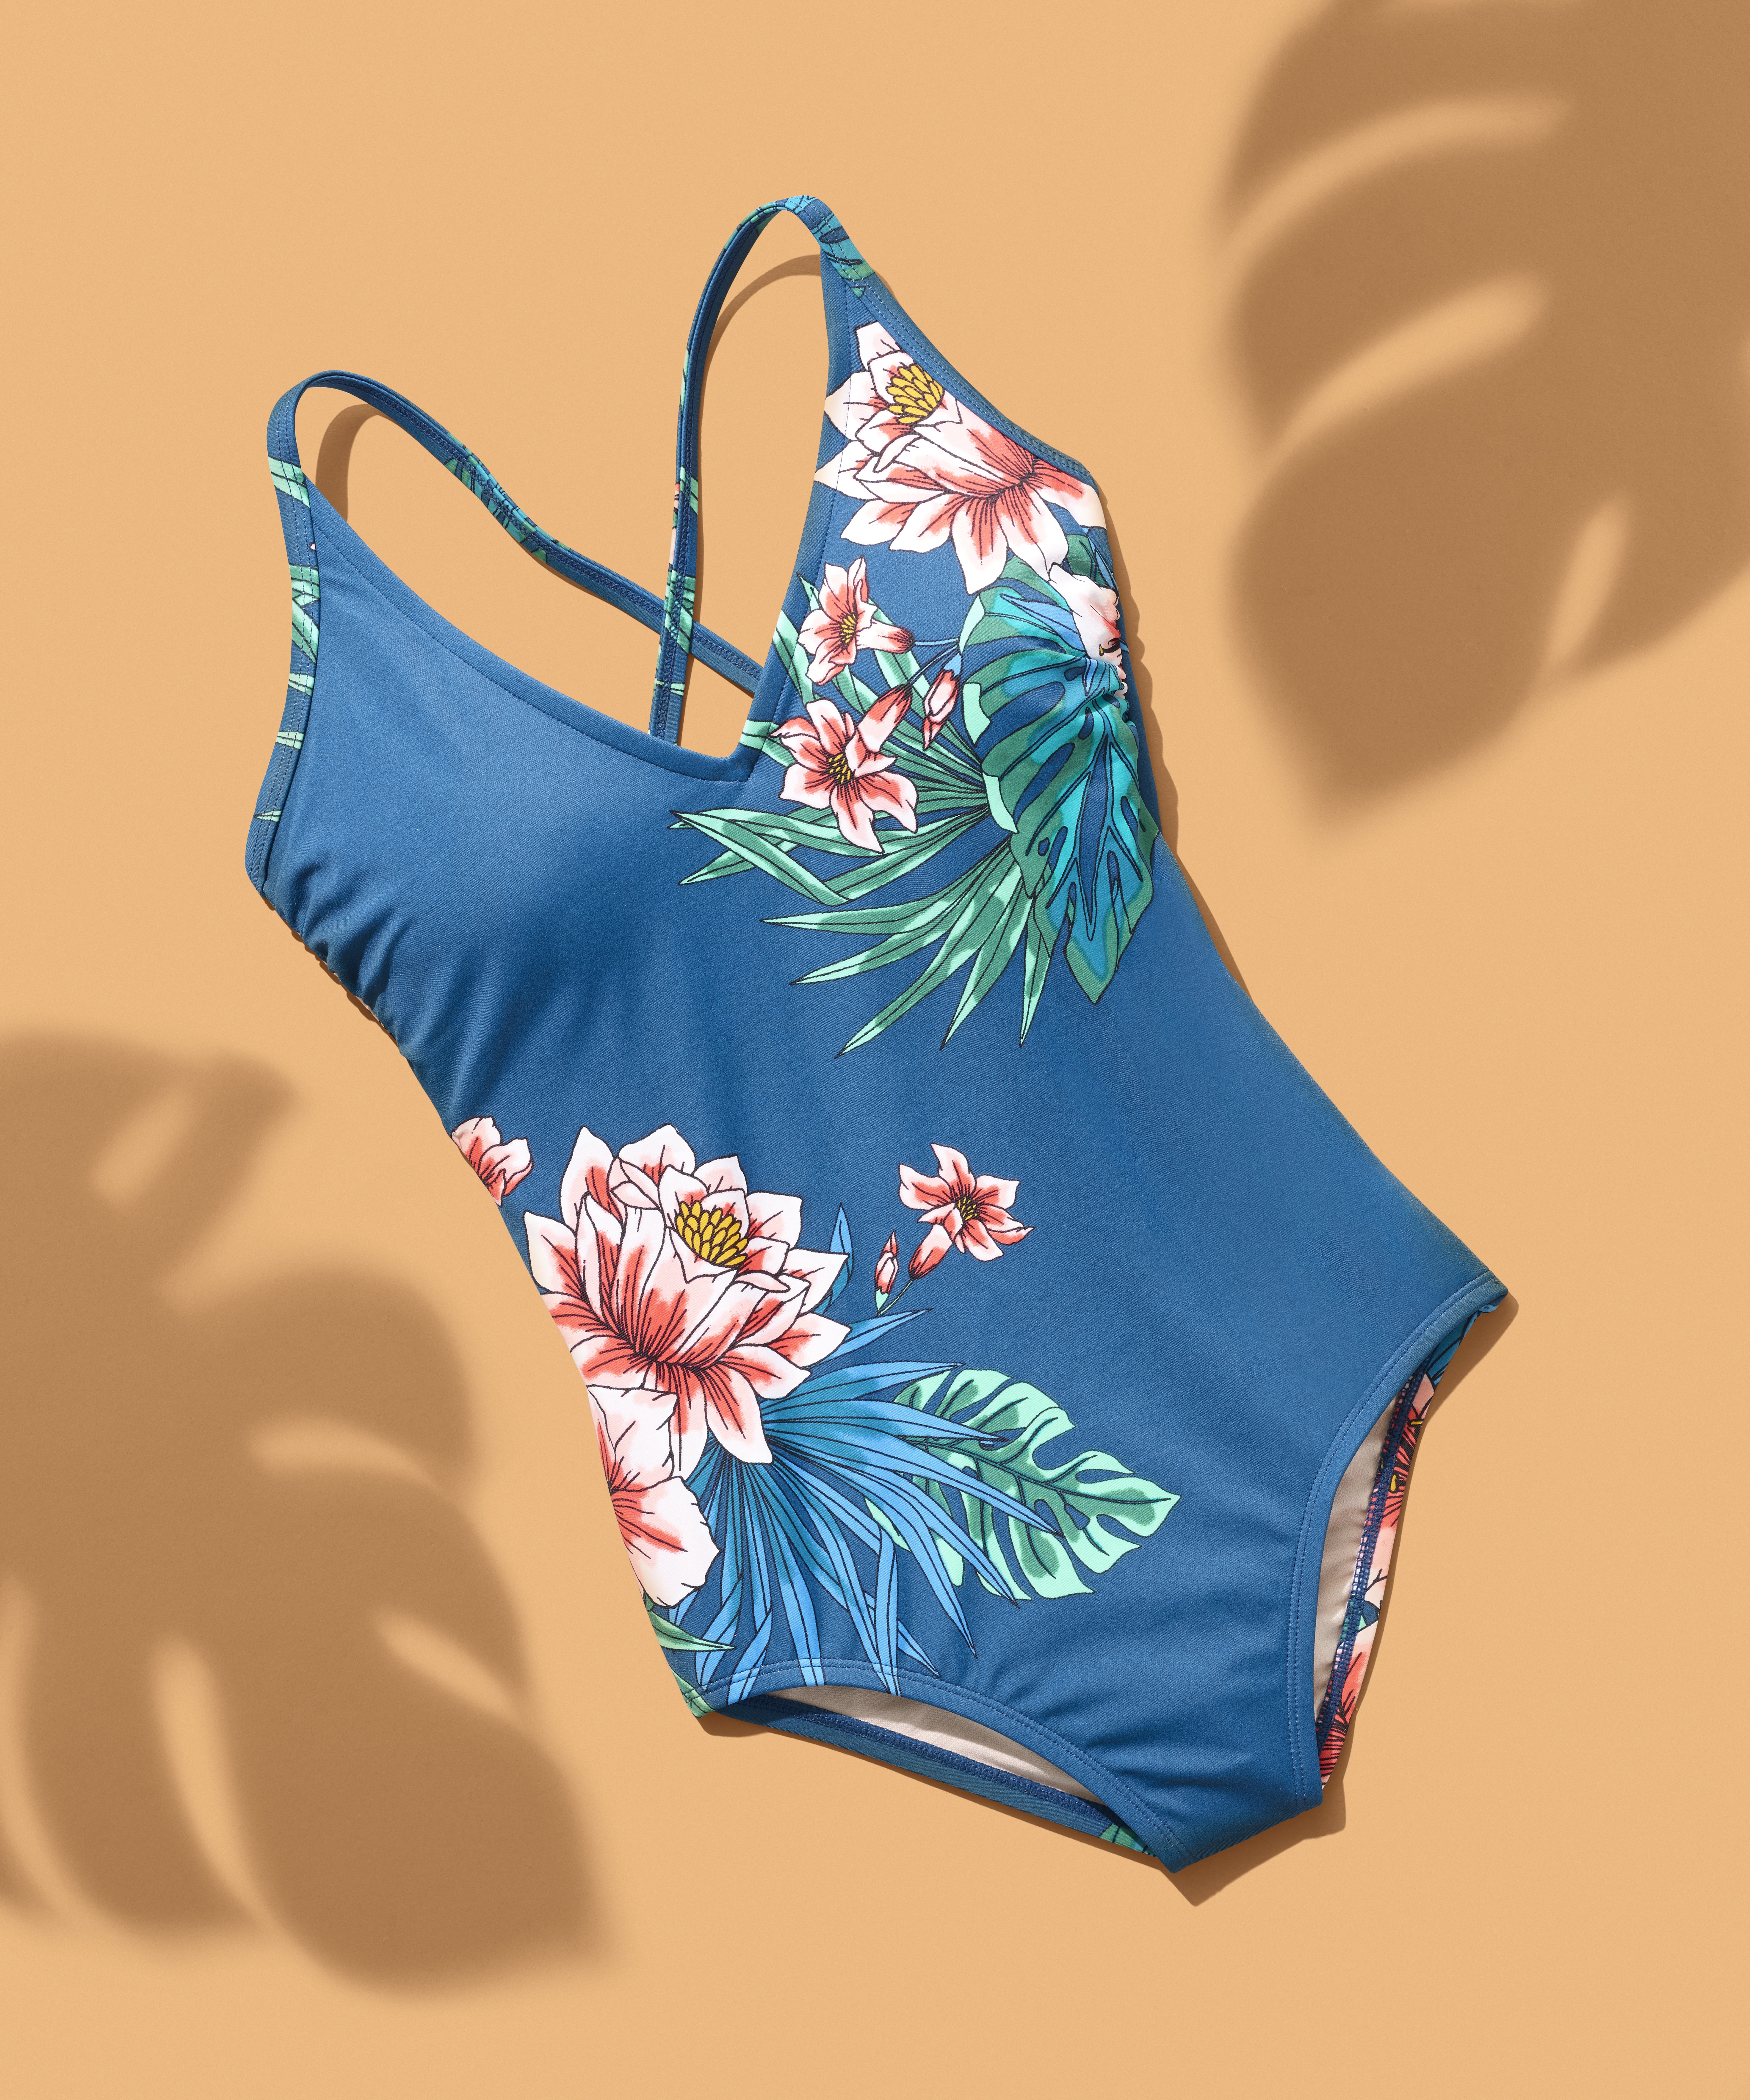 Target Launched Size-Inclusive Swimsuit Brand Kona Sol